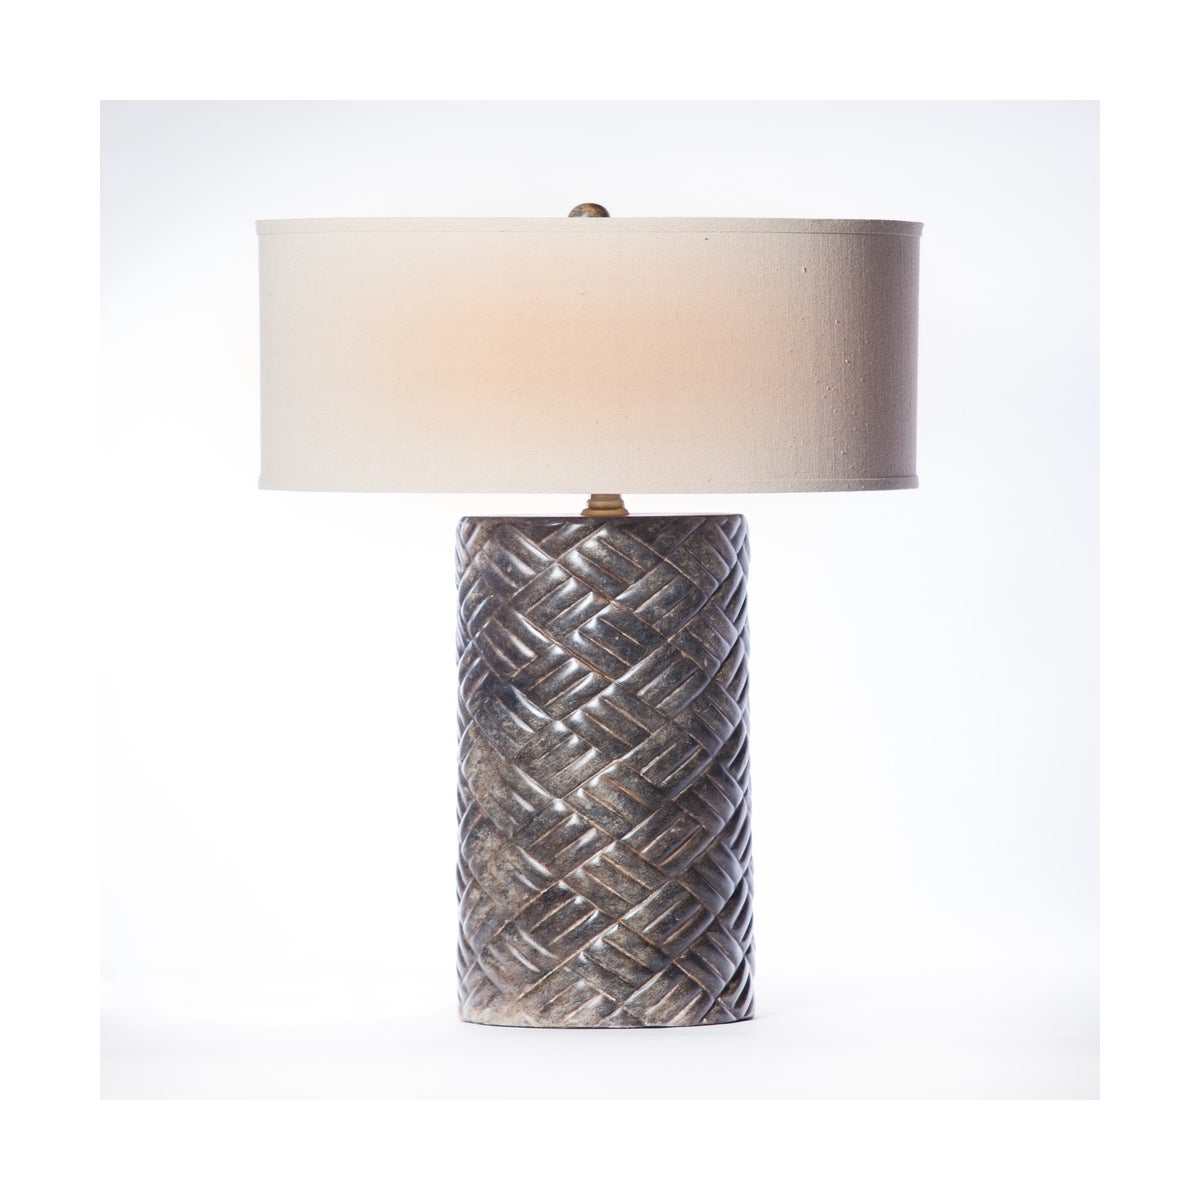 Dalton Table Lamp In Silver Cast With 18 Drum Shade In Linen With White Lining Table Lamps Prima Design Source